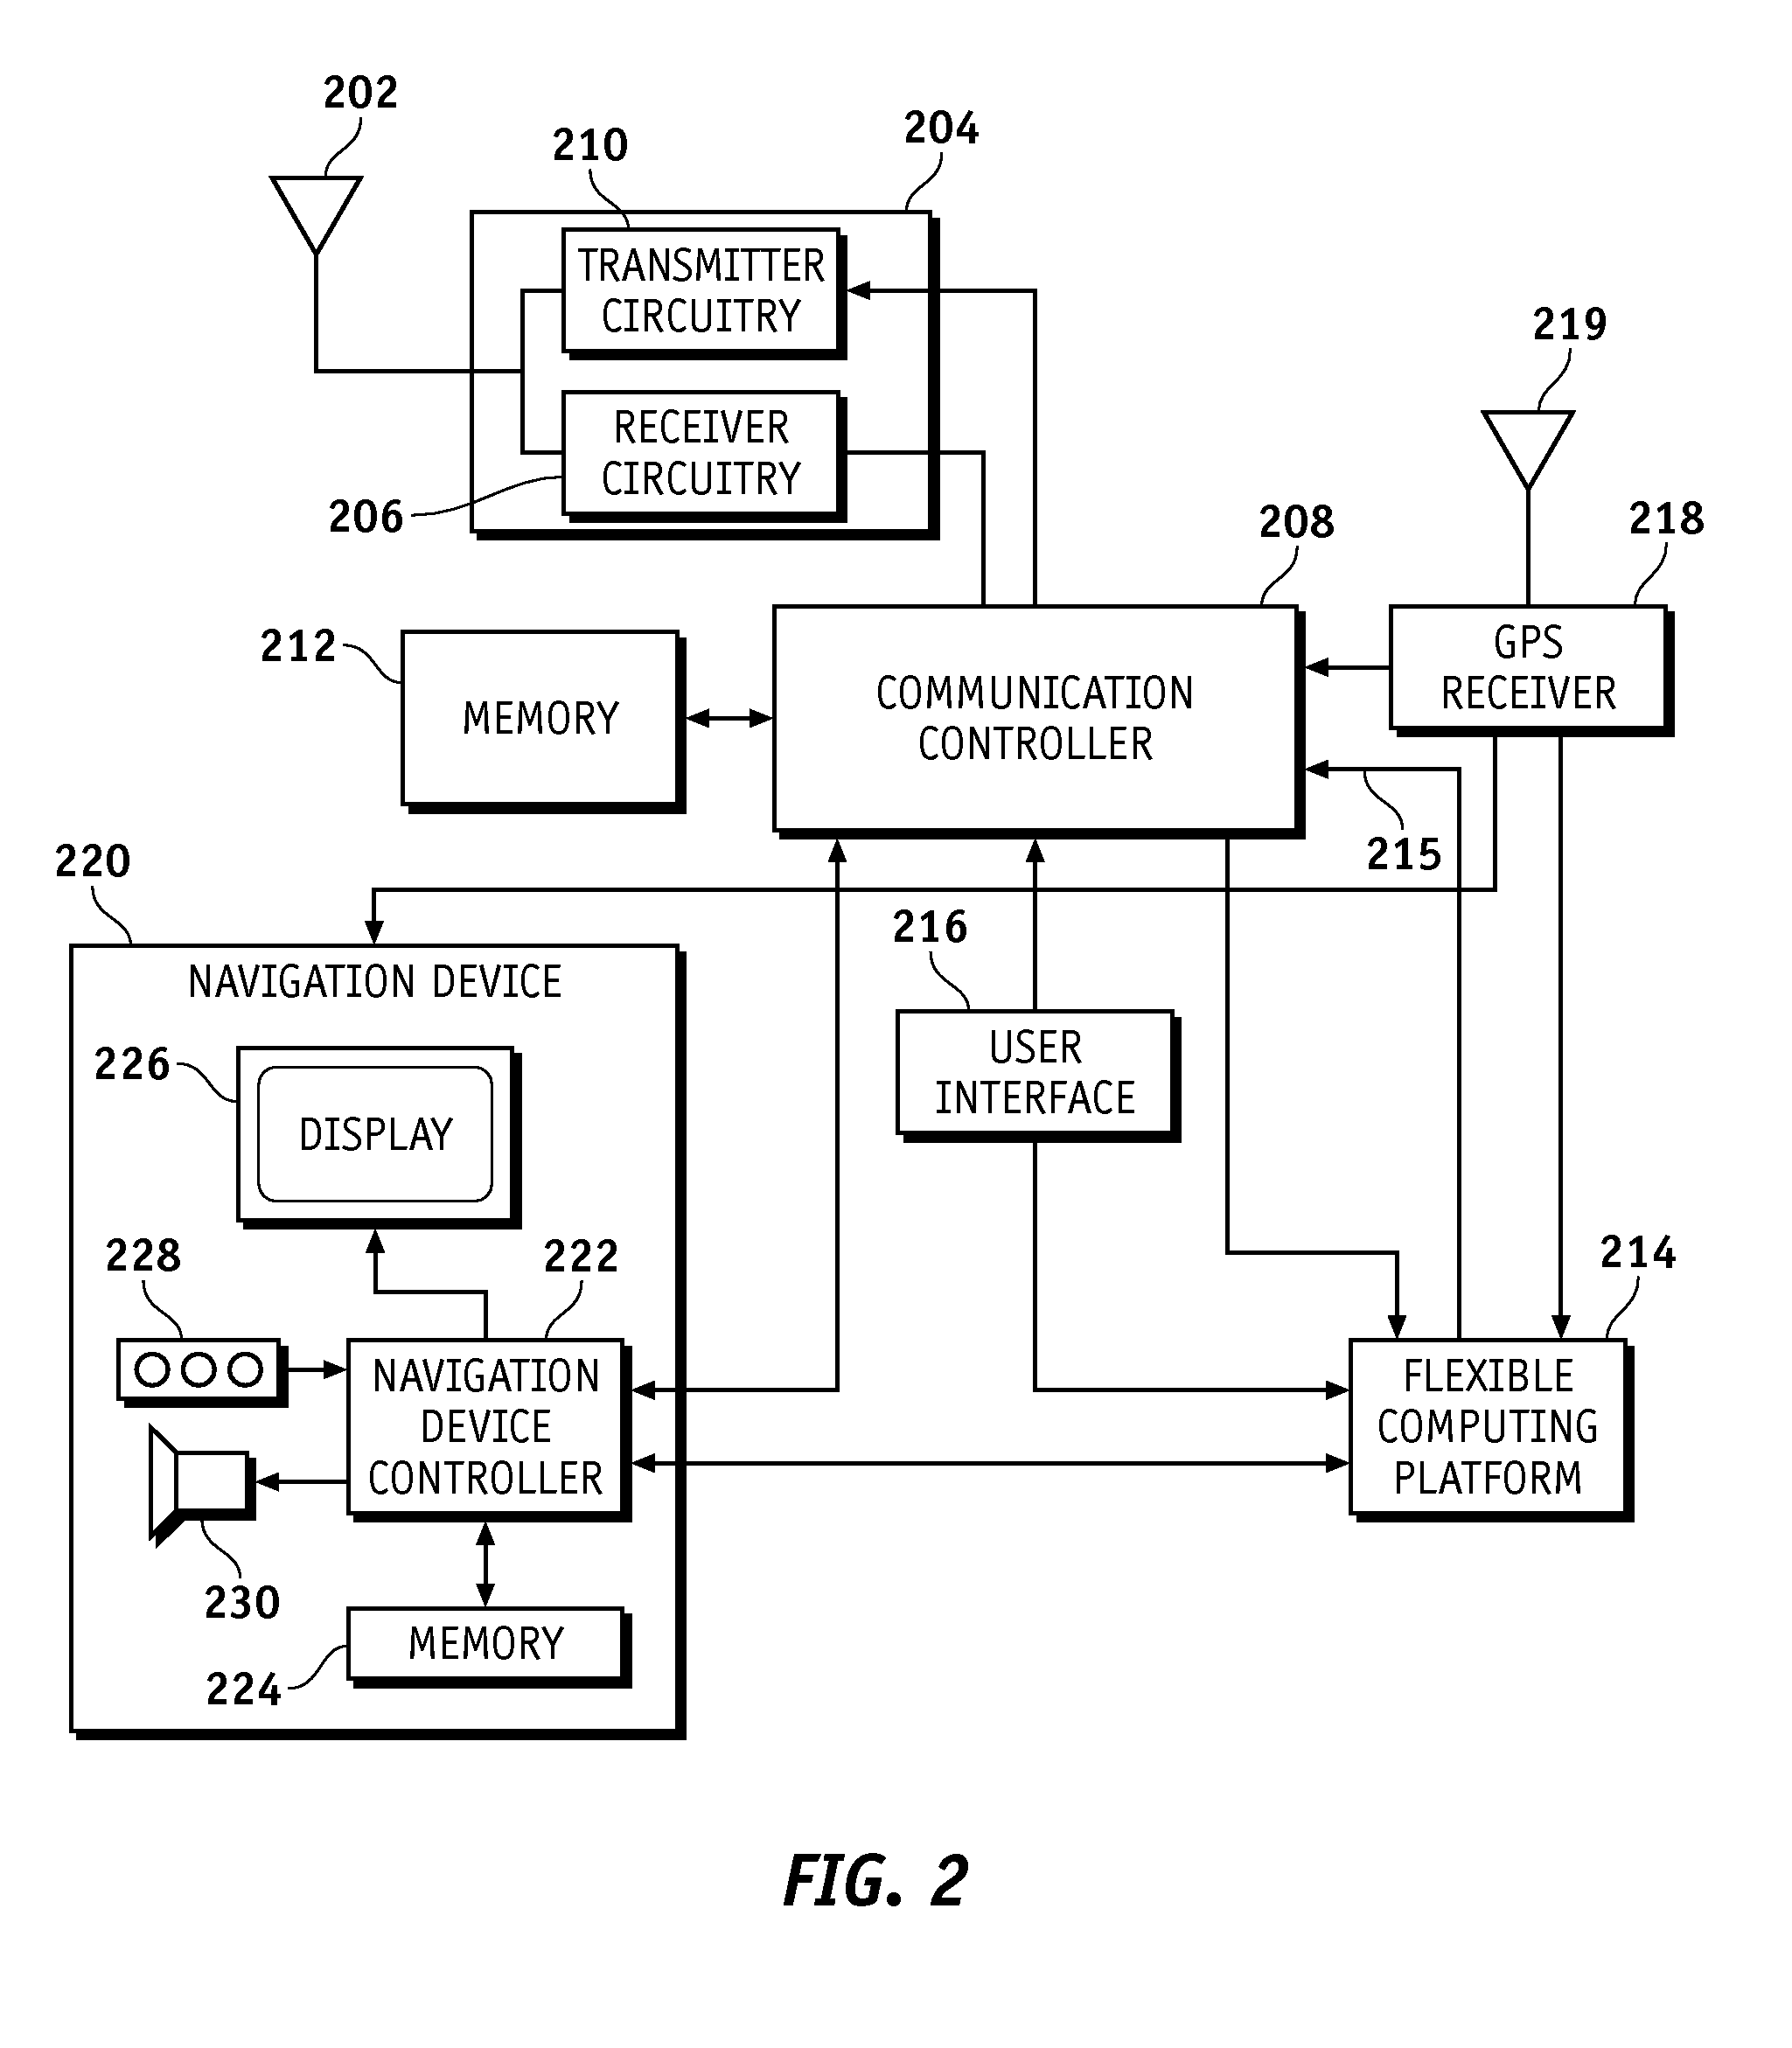 Initiating wireless communication between a vehicle and an access point